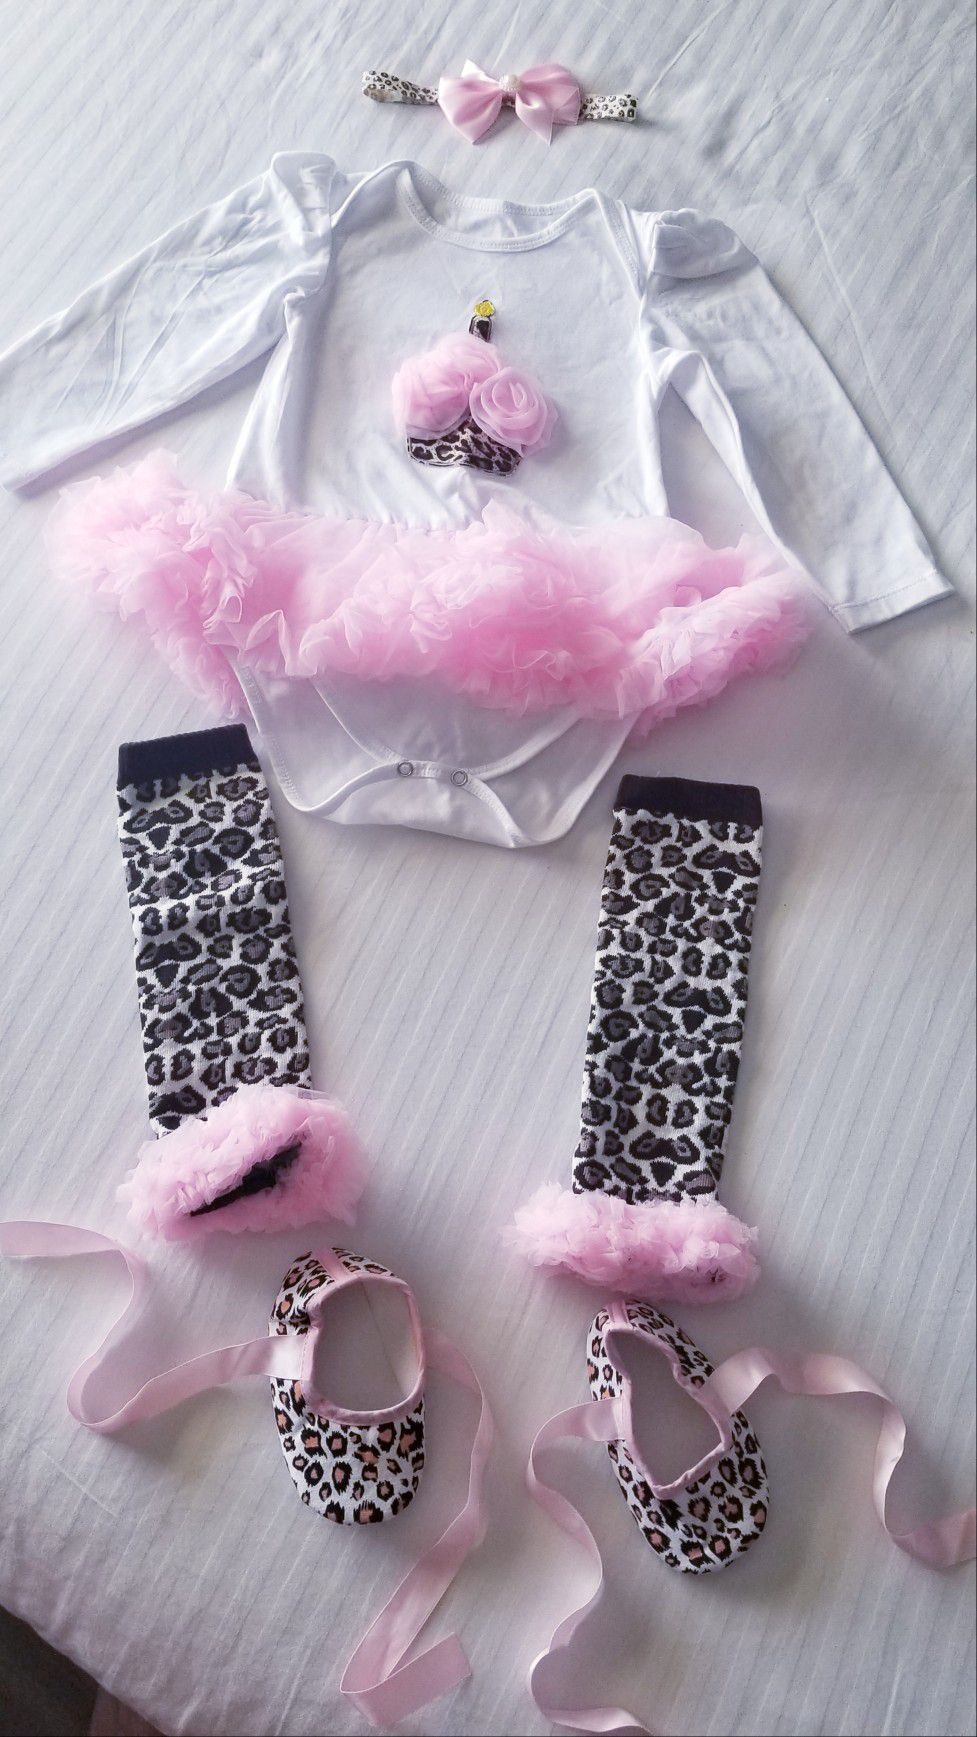 Baby girl outfit 12 months FIRM PRICE